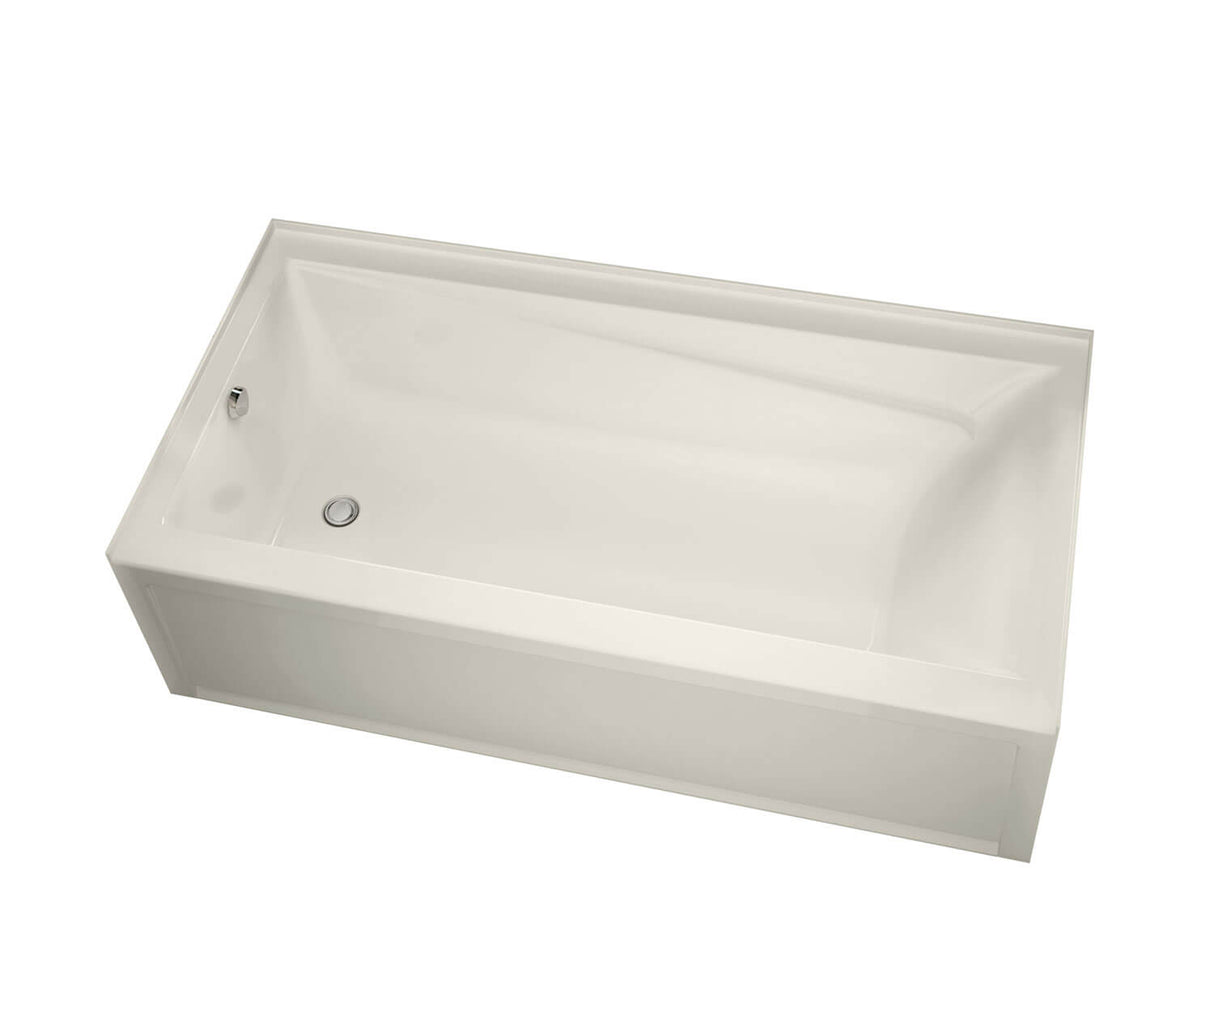 MAAX 106179-L-003-007 Exhibit 6636 IFS Acrylic Alcove Left-Hand Drain Whirlpool Bathtub in Biscuit